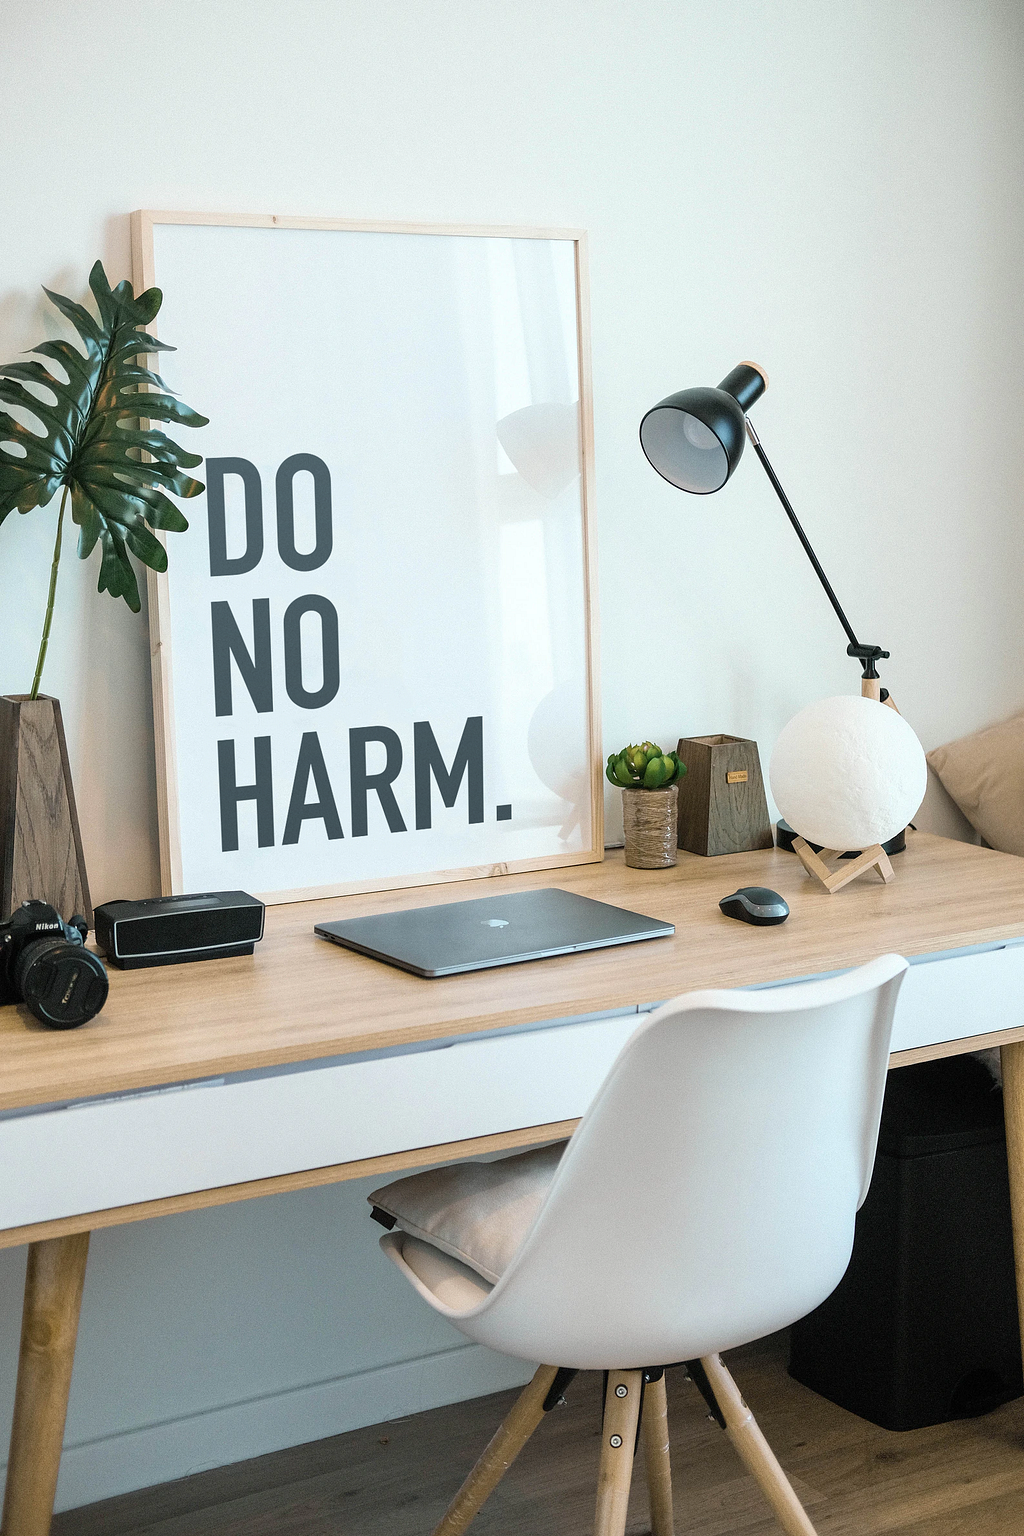 A desk with a laptop and a “Do no harm” sign.